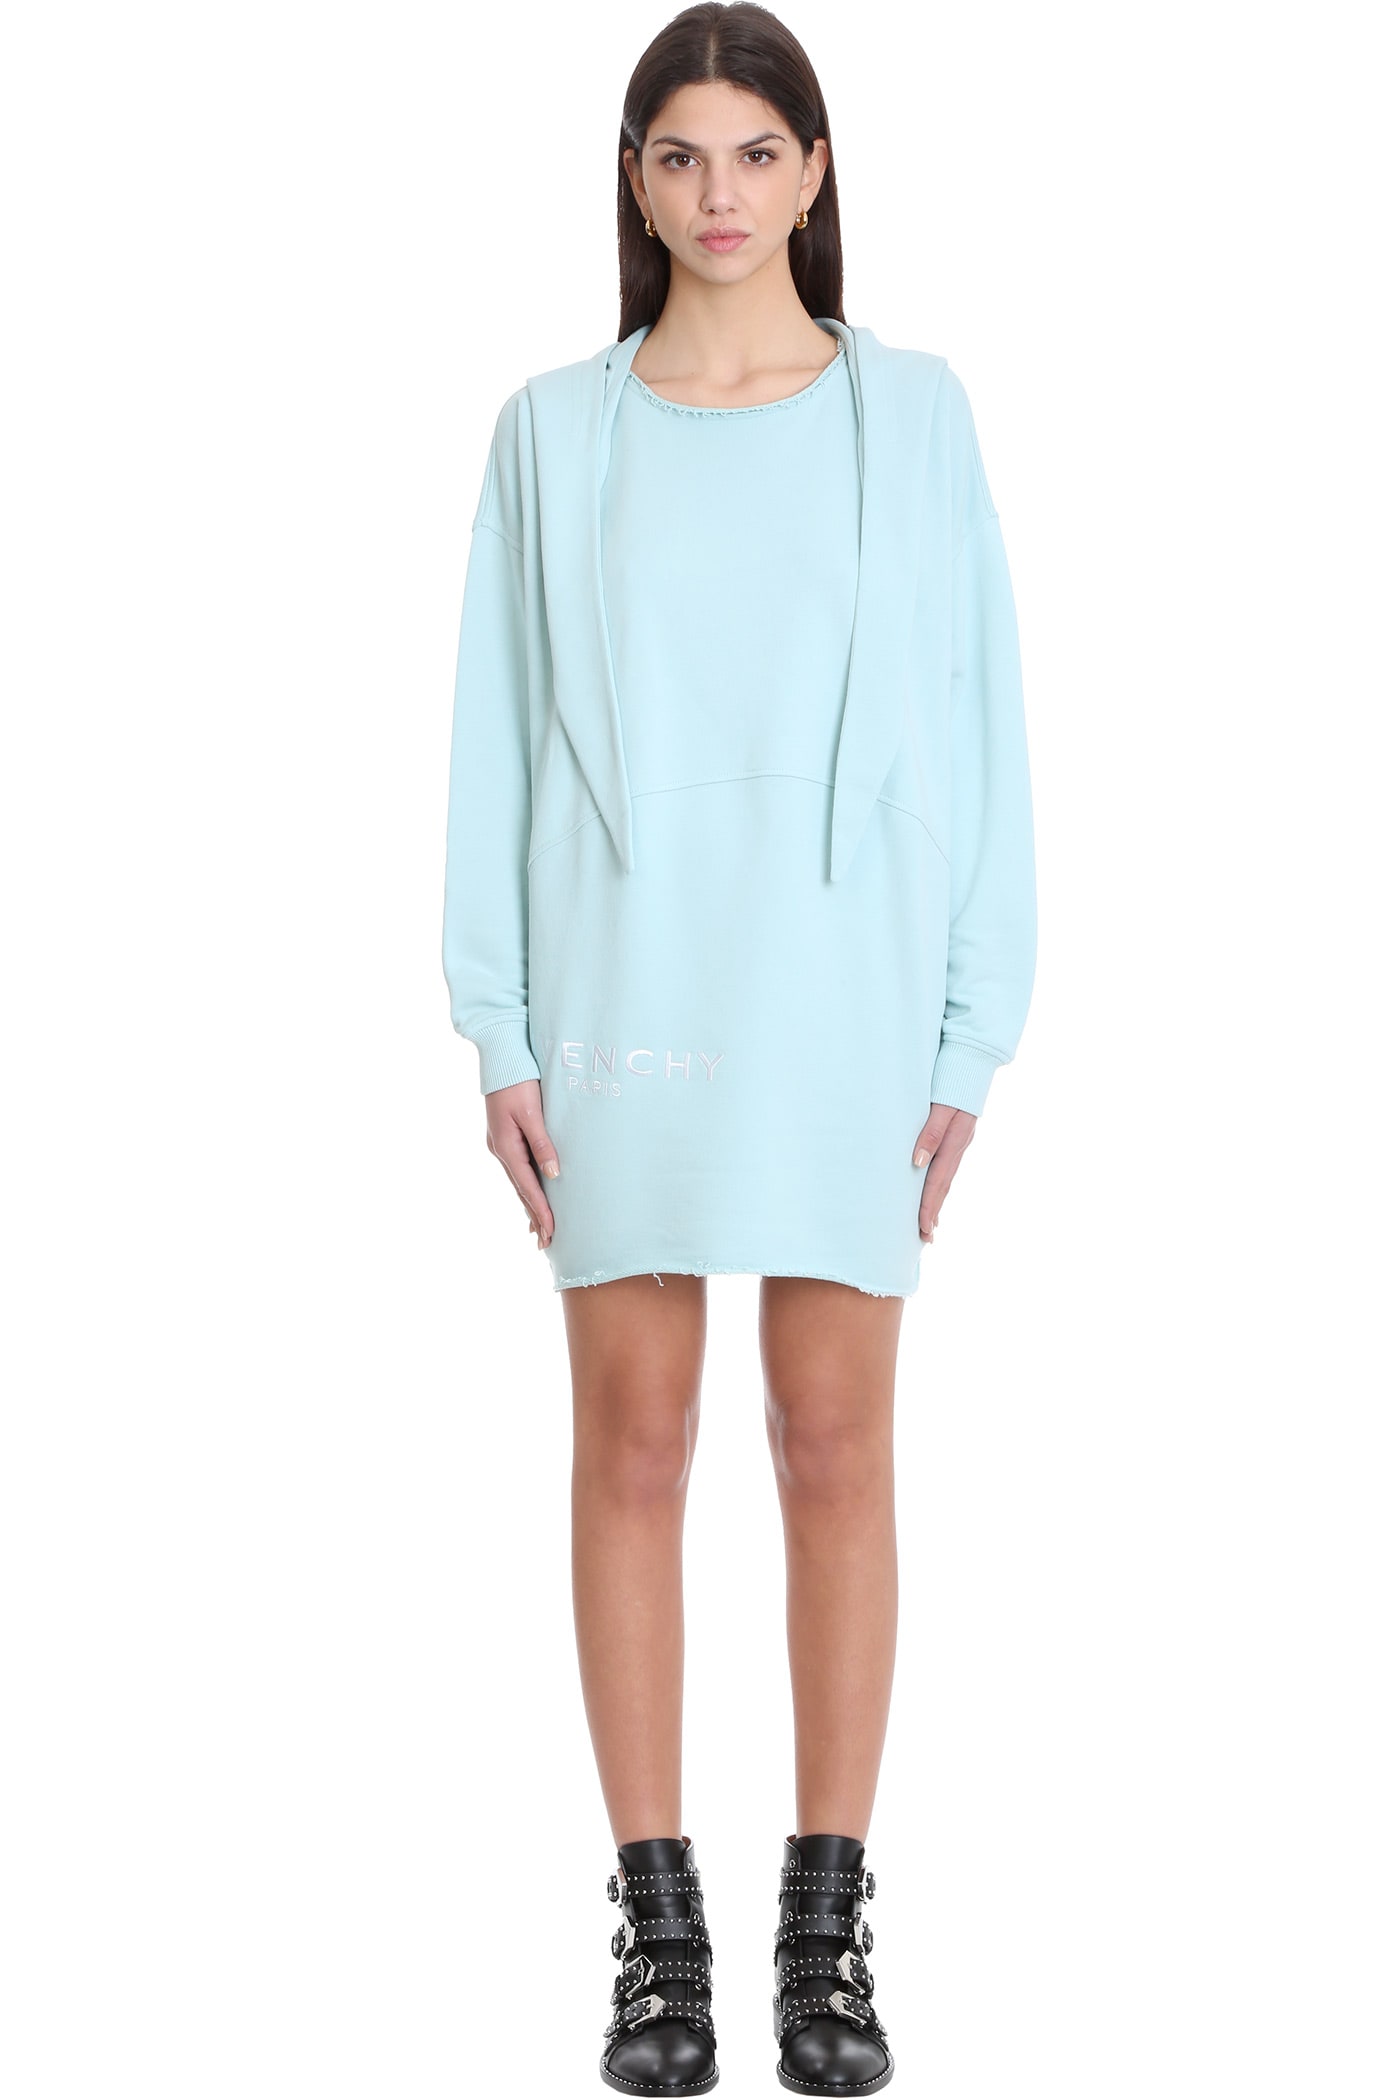 Givenchy Dress In Cyan Cotton